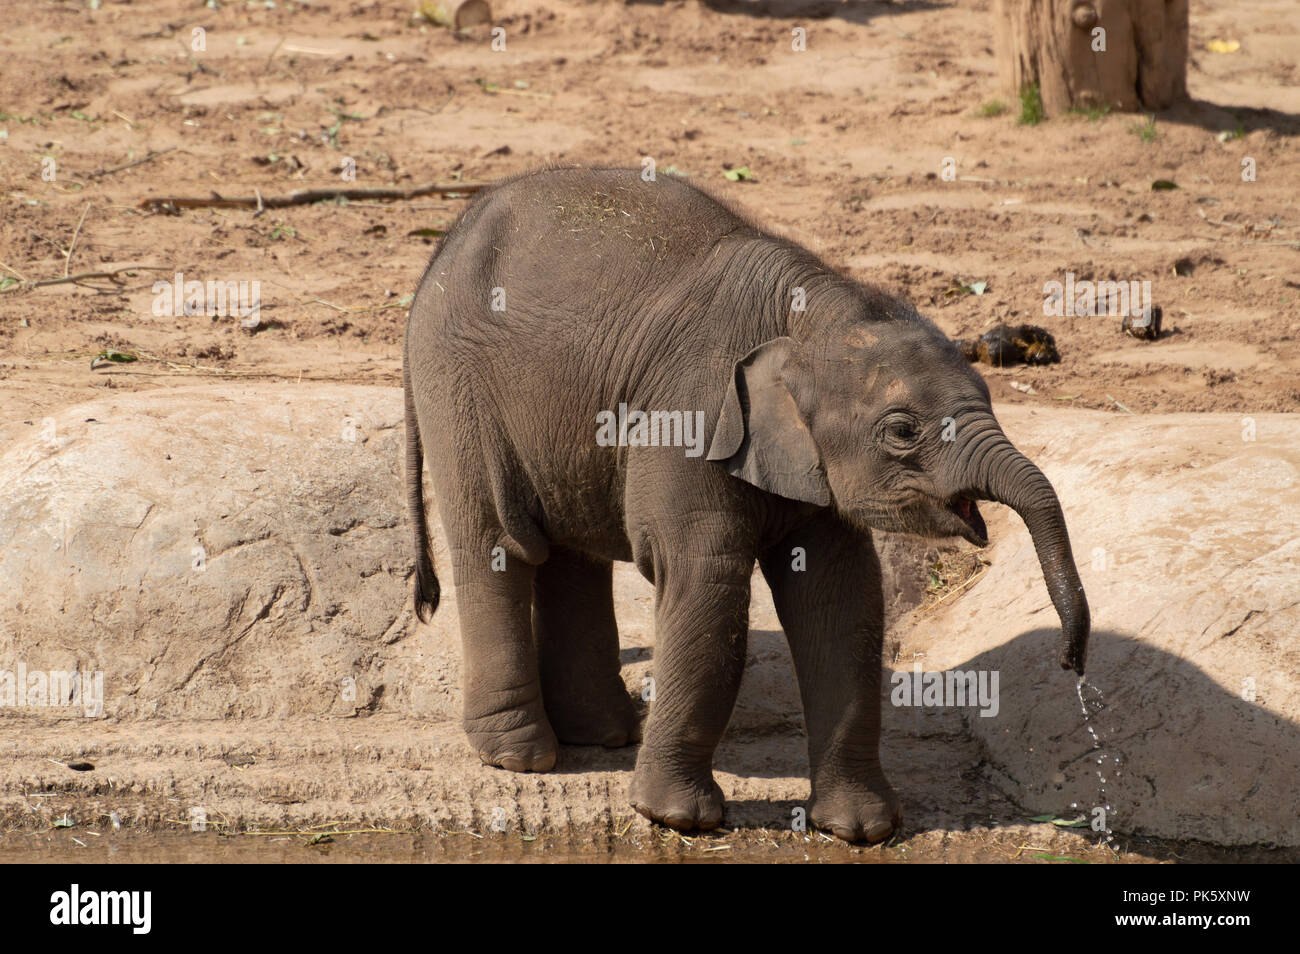 A captive baby elephant at the zoo with water dripping from their trunk. Stock Photo